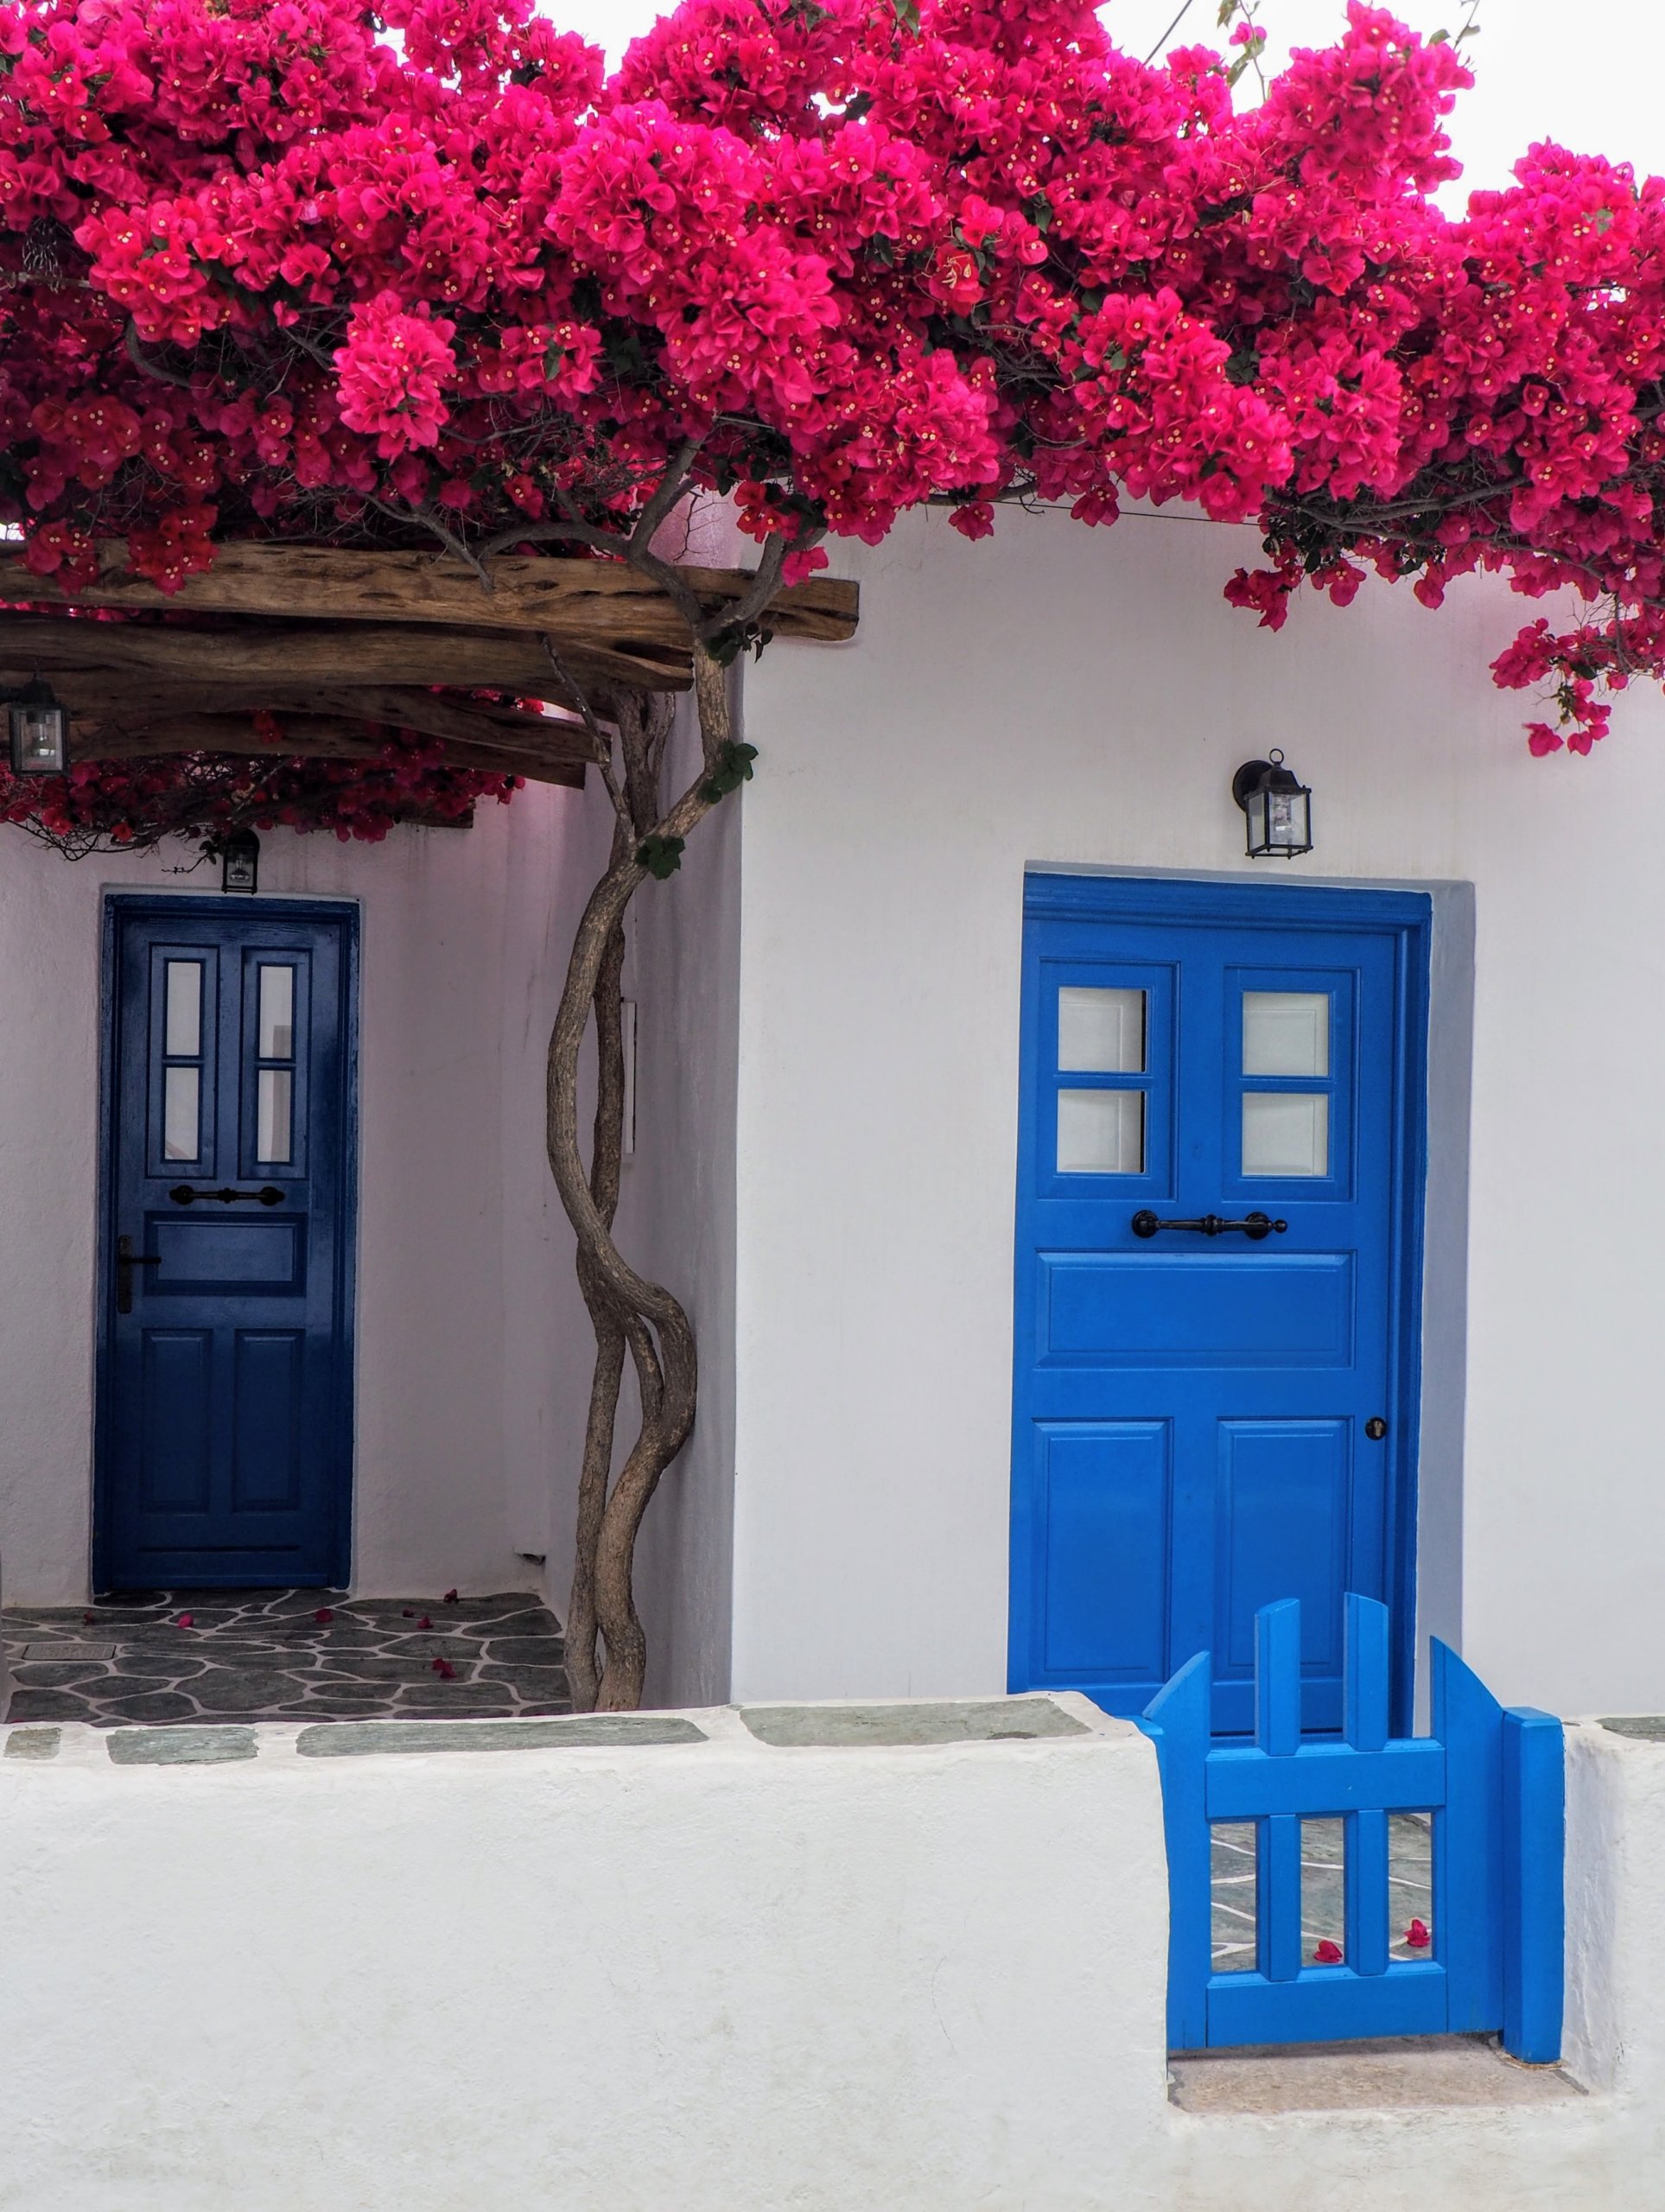 White exterior with blue door and pink flowers on top